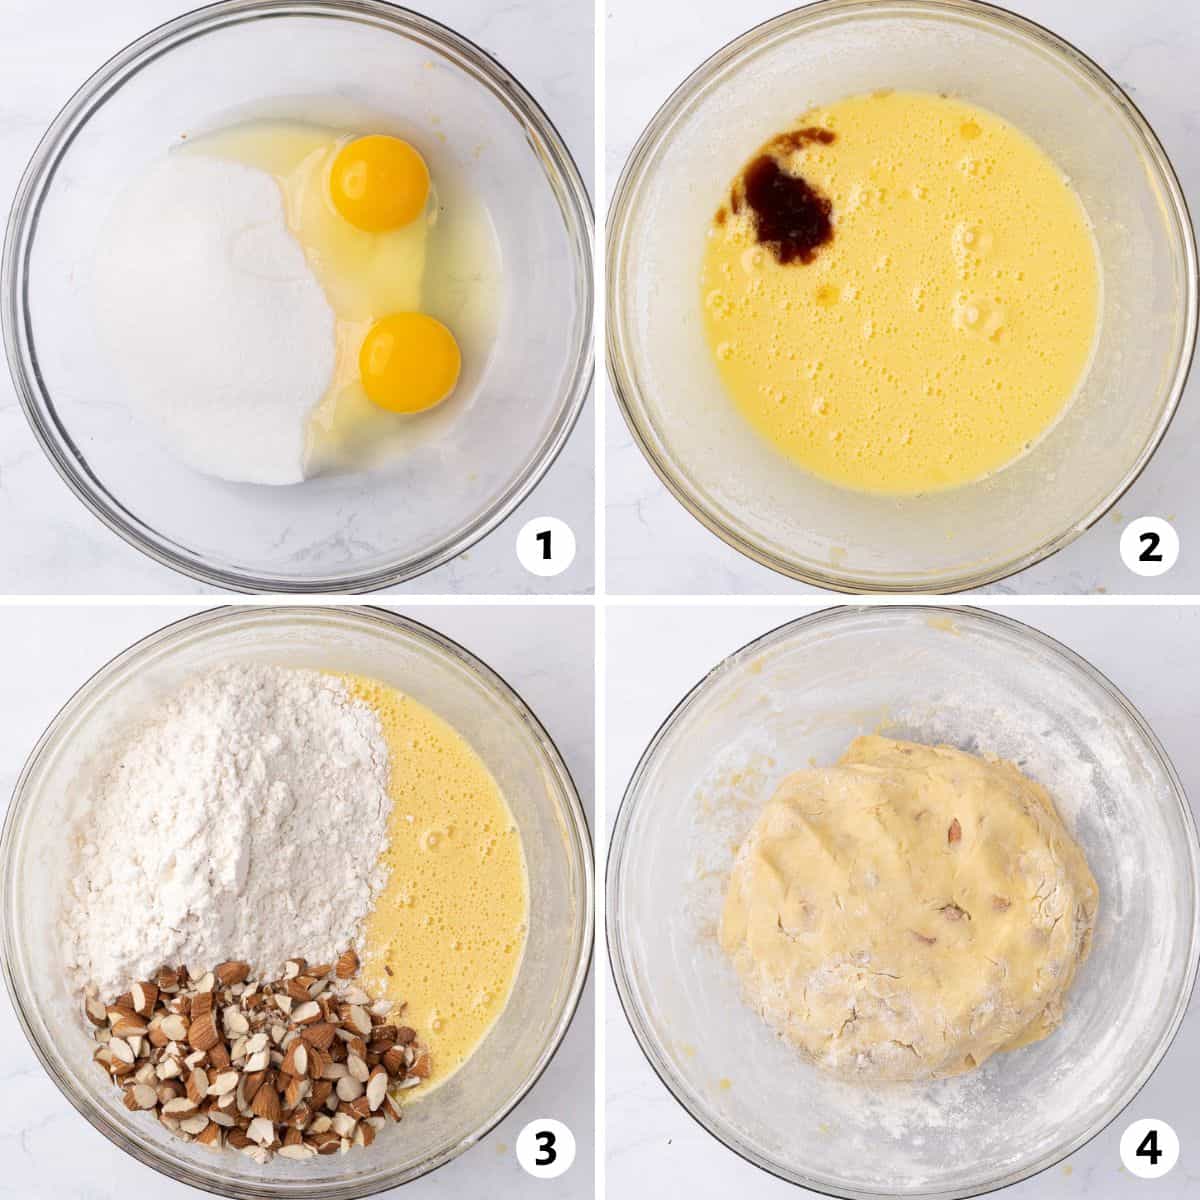 4 image collage preparing dough: 1- eggs and sugar in bowl, 2- after mixing with vanilla added, 3- flour and pecans added, 4-dough after mixing.